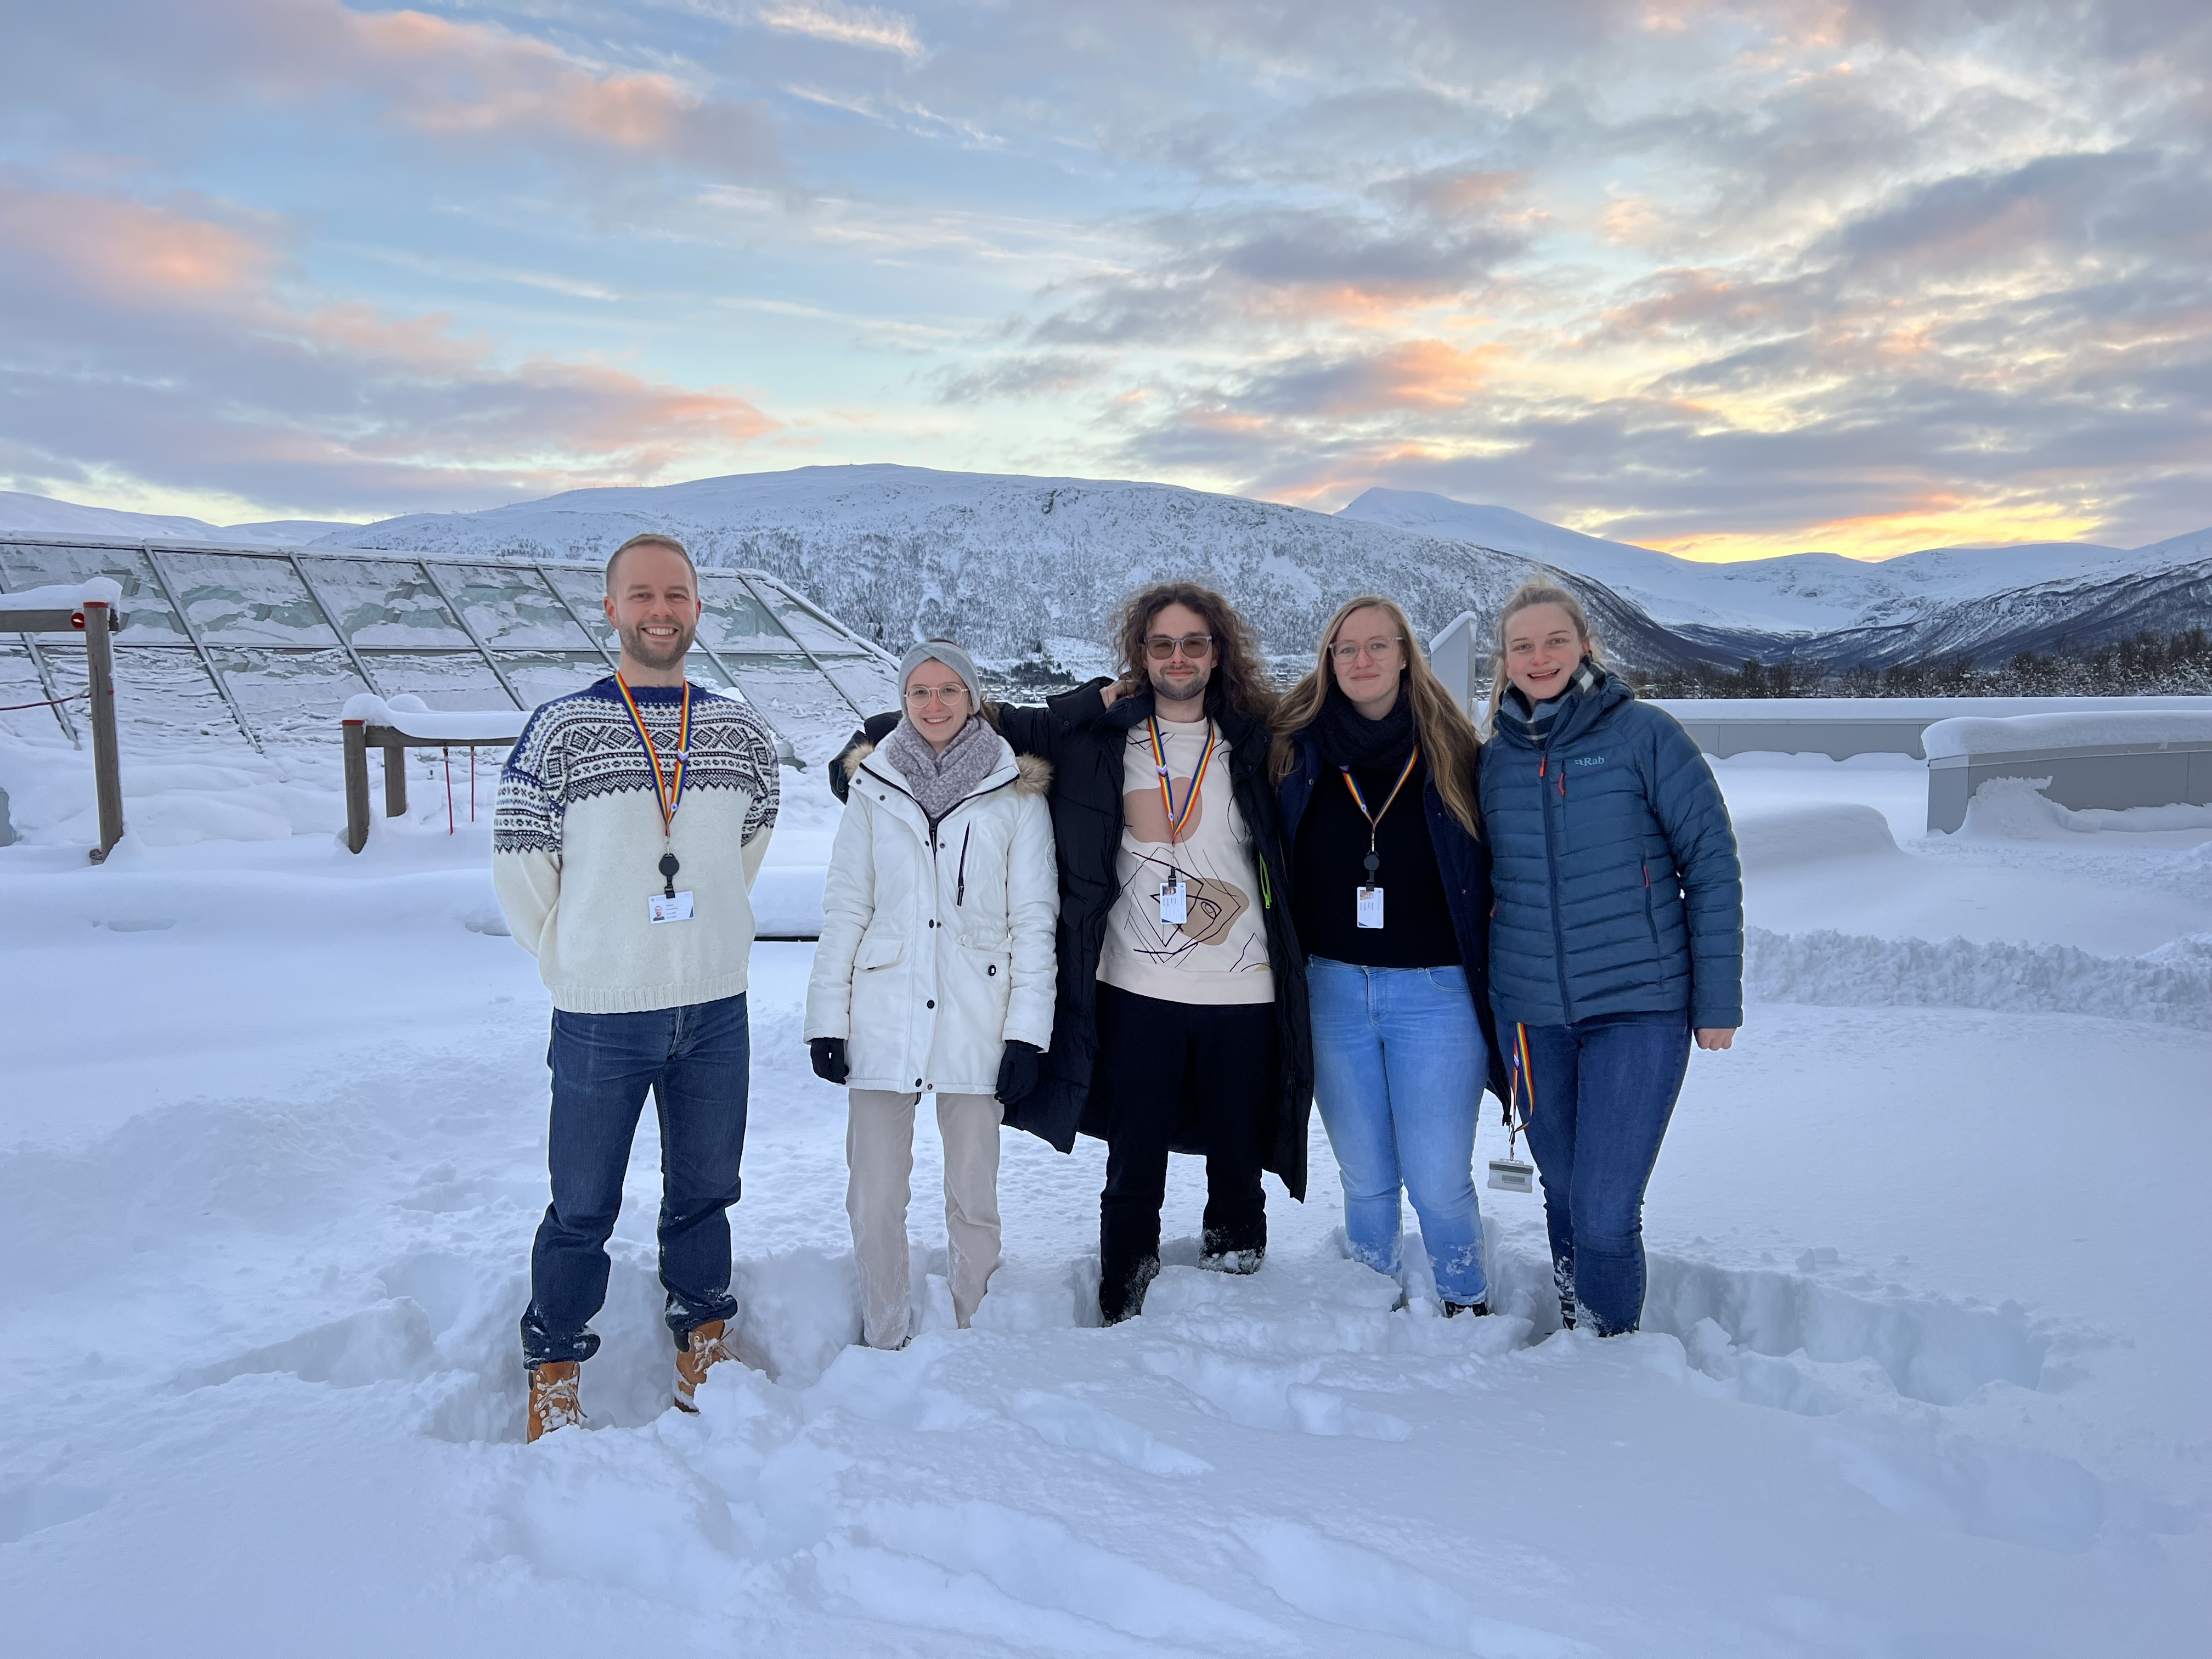 The Haugland research group in 2023. From left to right: Marius, Lea, Mateusz, Floriane, Anna. They are smiling, standing in the snow, with a view of the sea, snow-clad mountains and colourful, polar night skies.